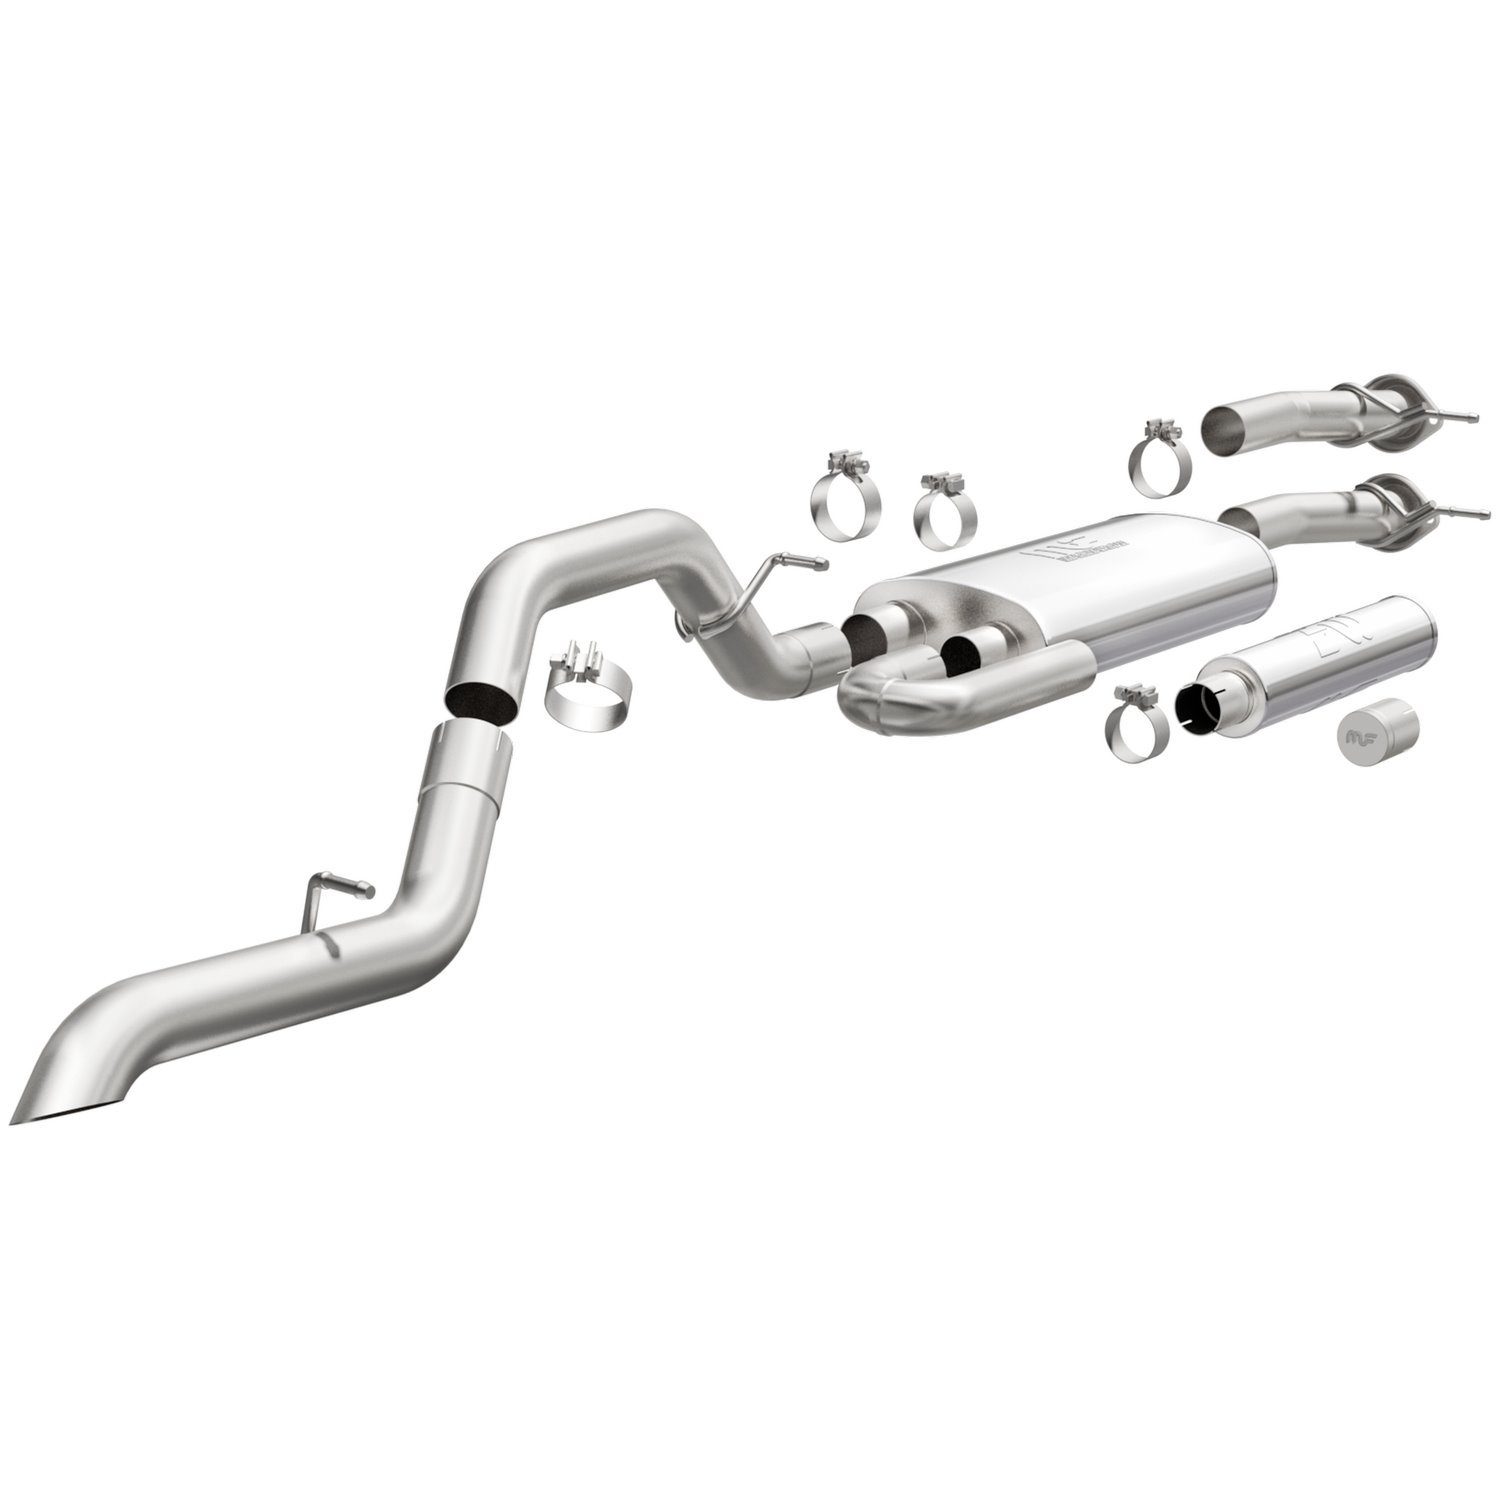 19569 Overland Series Cat-Back Exhaust System fits 2015-2022 Chevy Colorado, GMC Canyon 3.6L V6